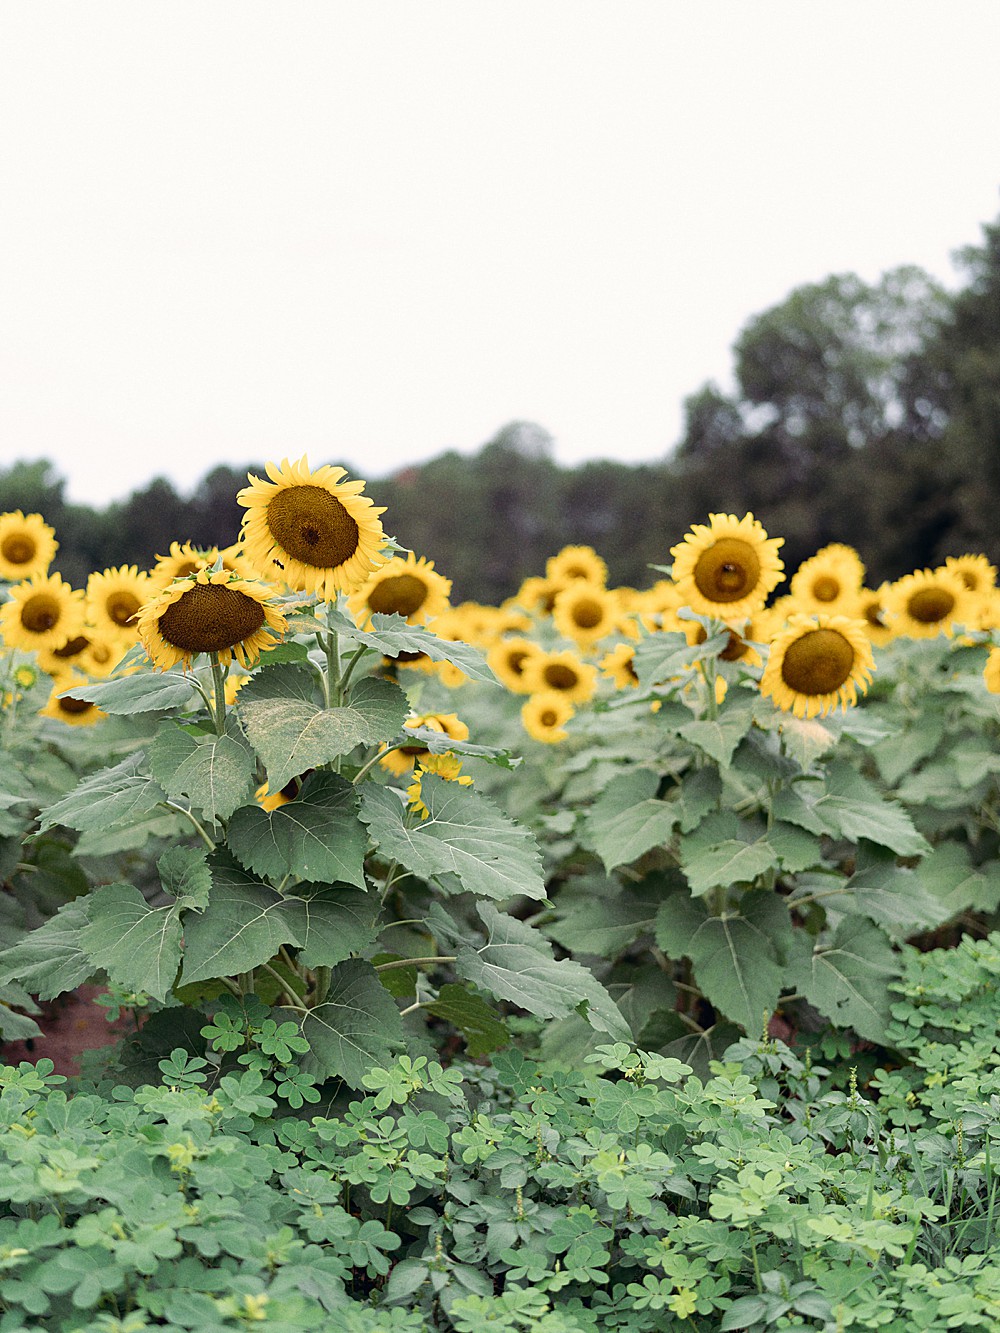 Sunflowers from Gregg Farms in Concord, Georgia